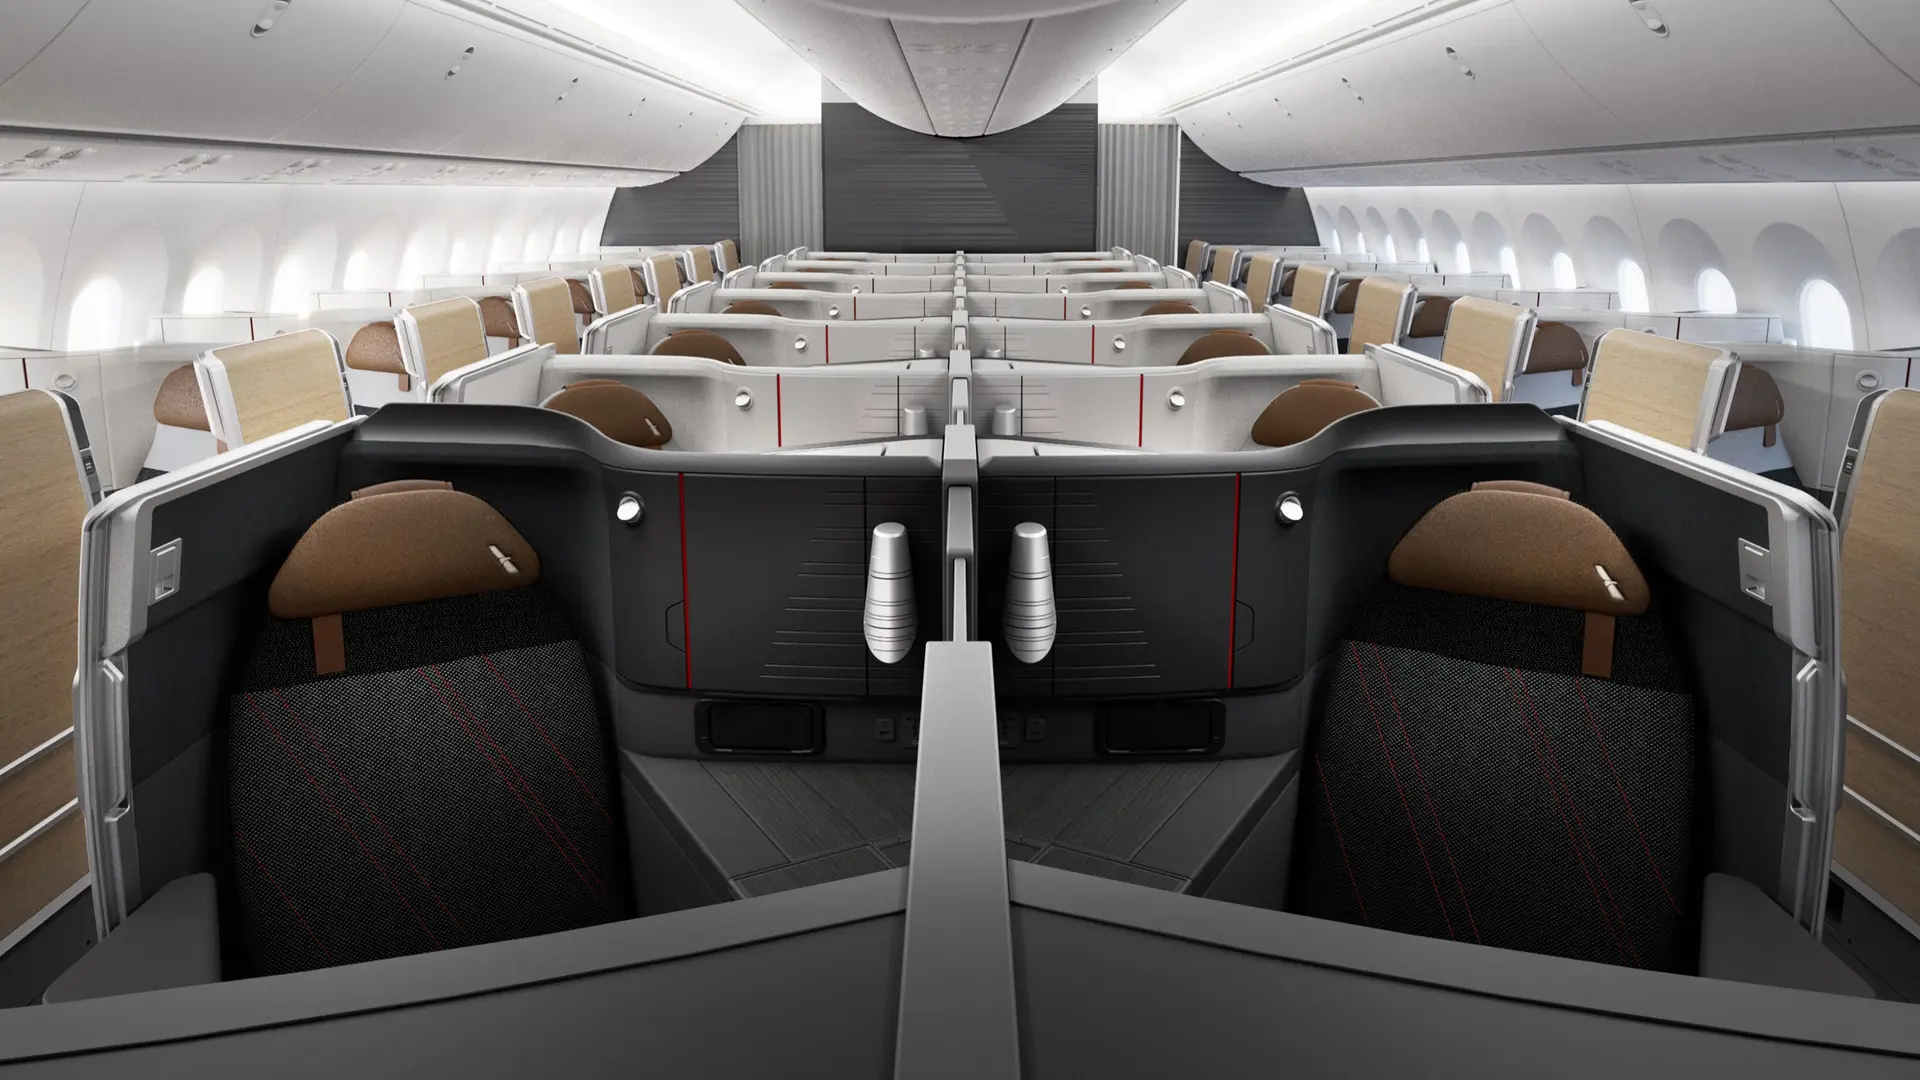 Airlines News - American Airlines - new premium seats, dining and amenities